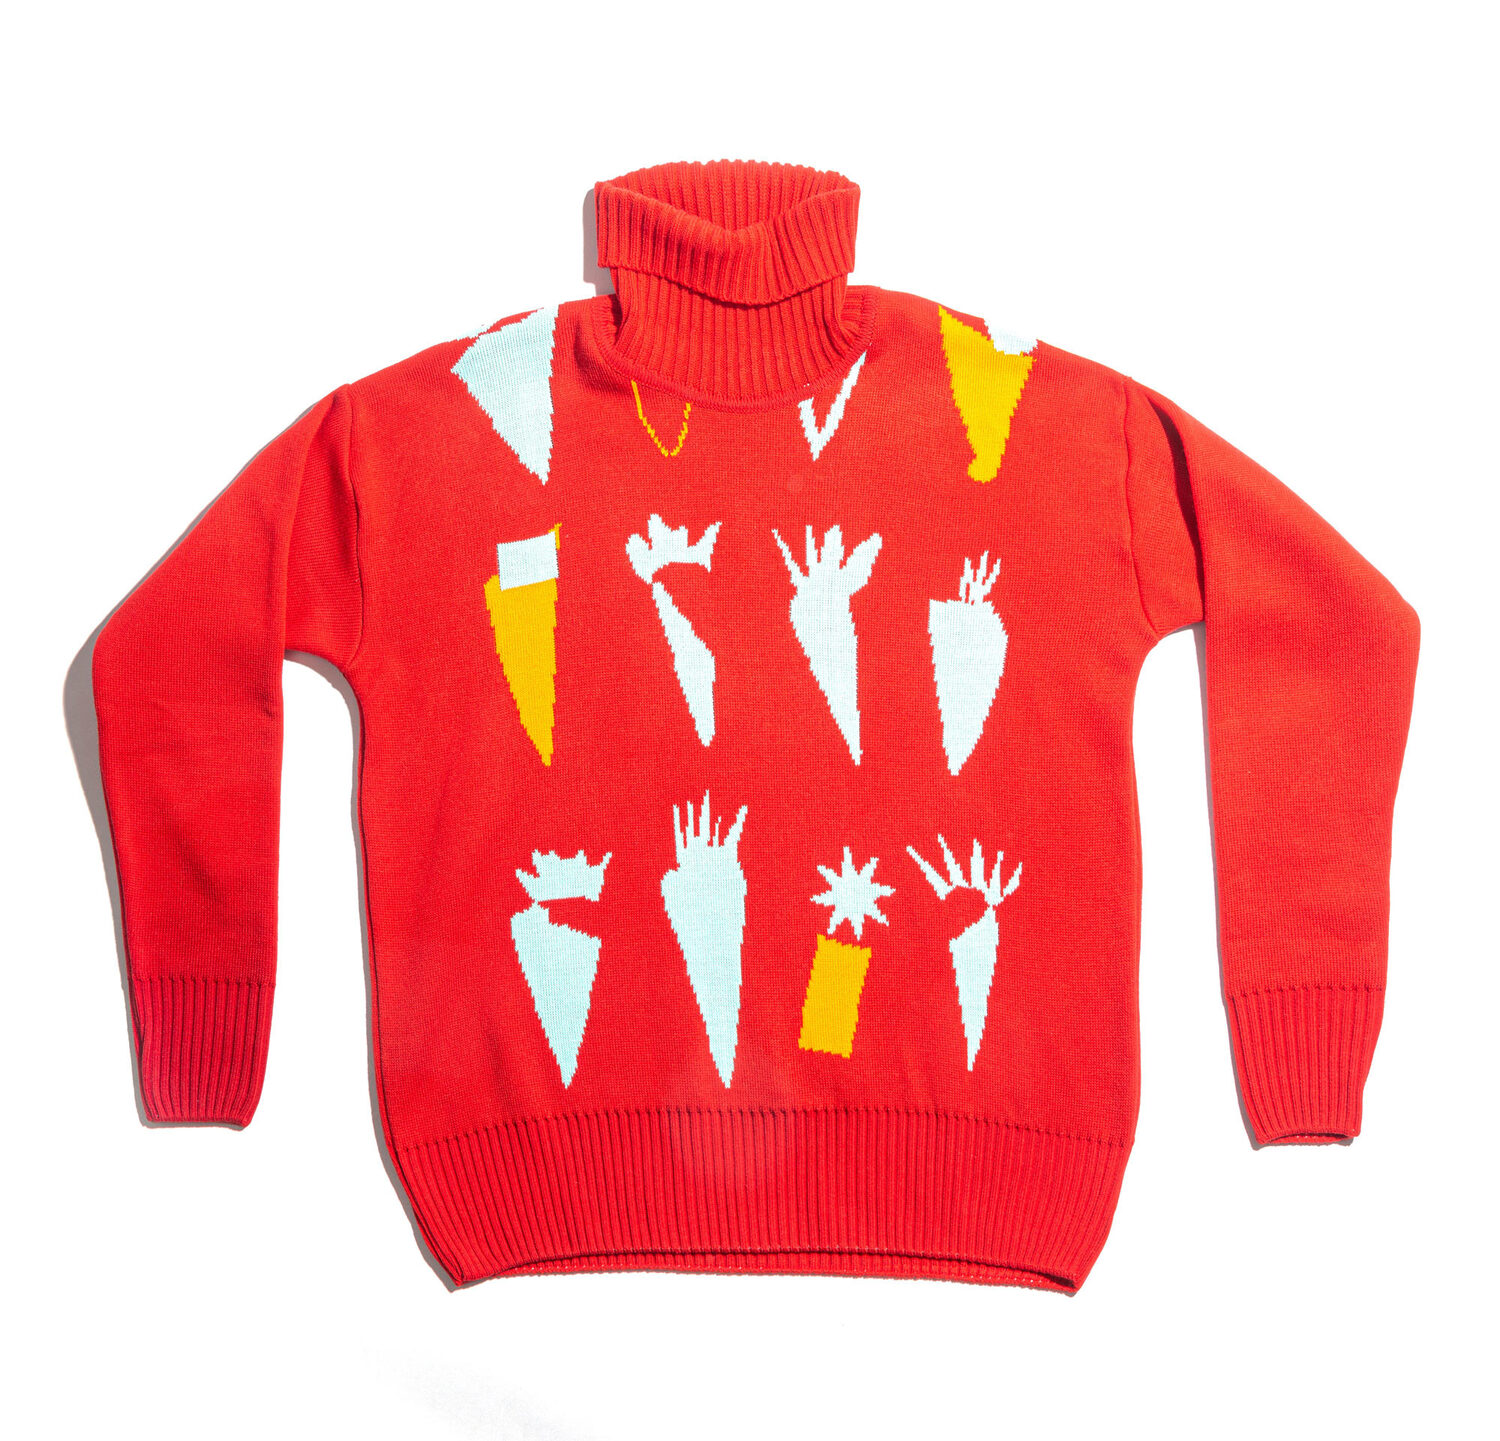 Lovely Carrots sweater